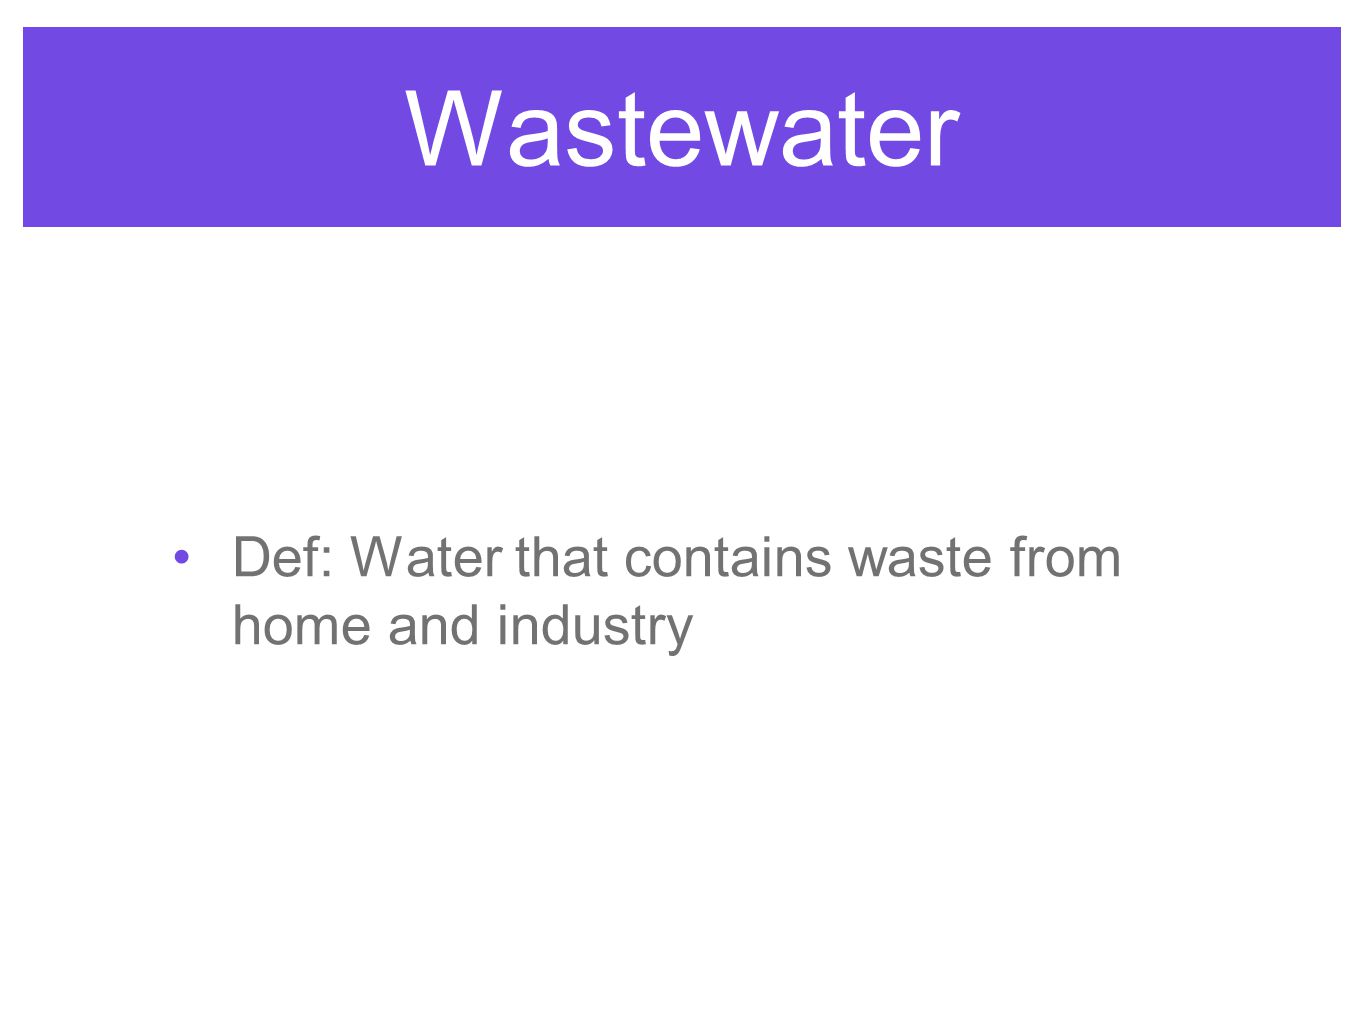 Wastewater Def: Water that contains waste from home and industry